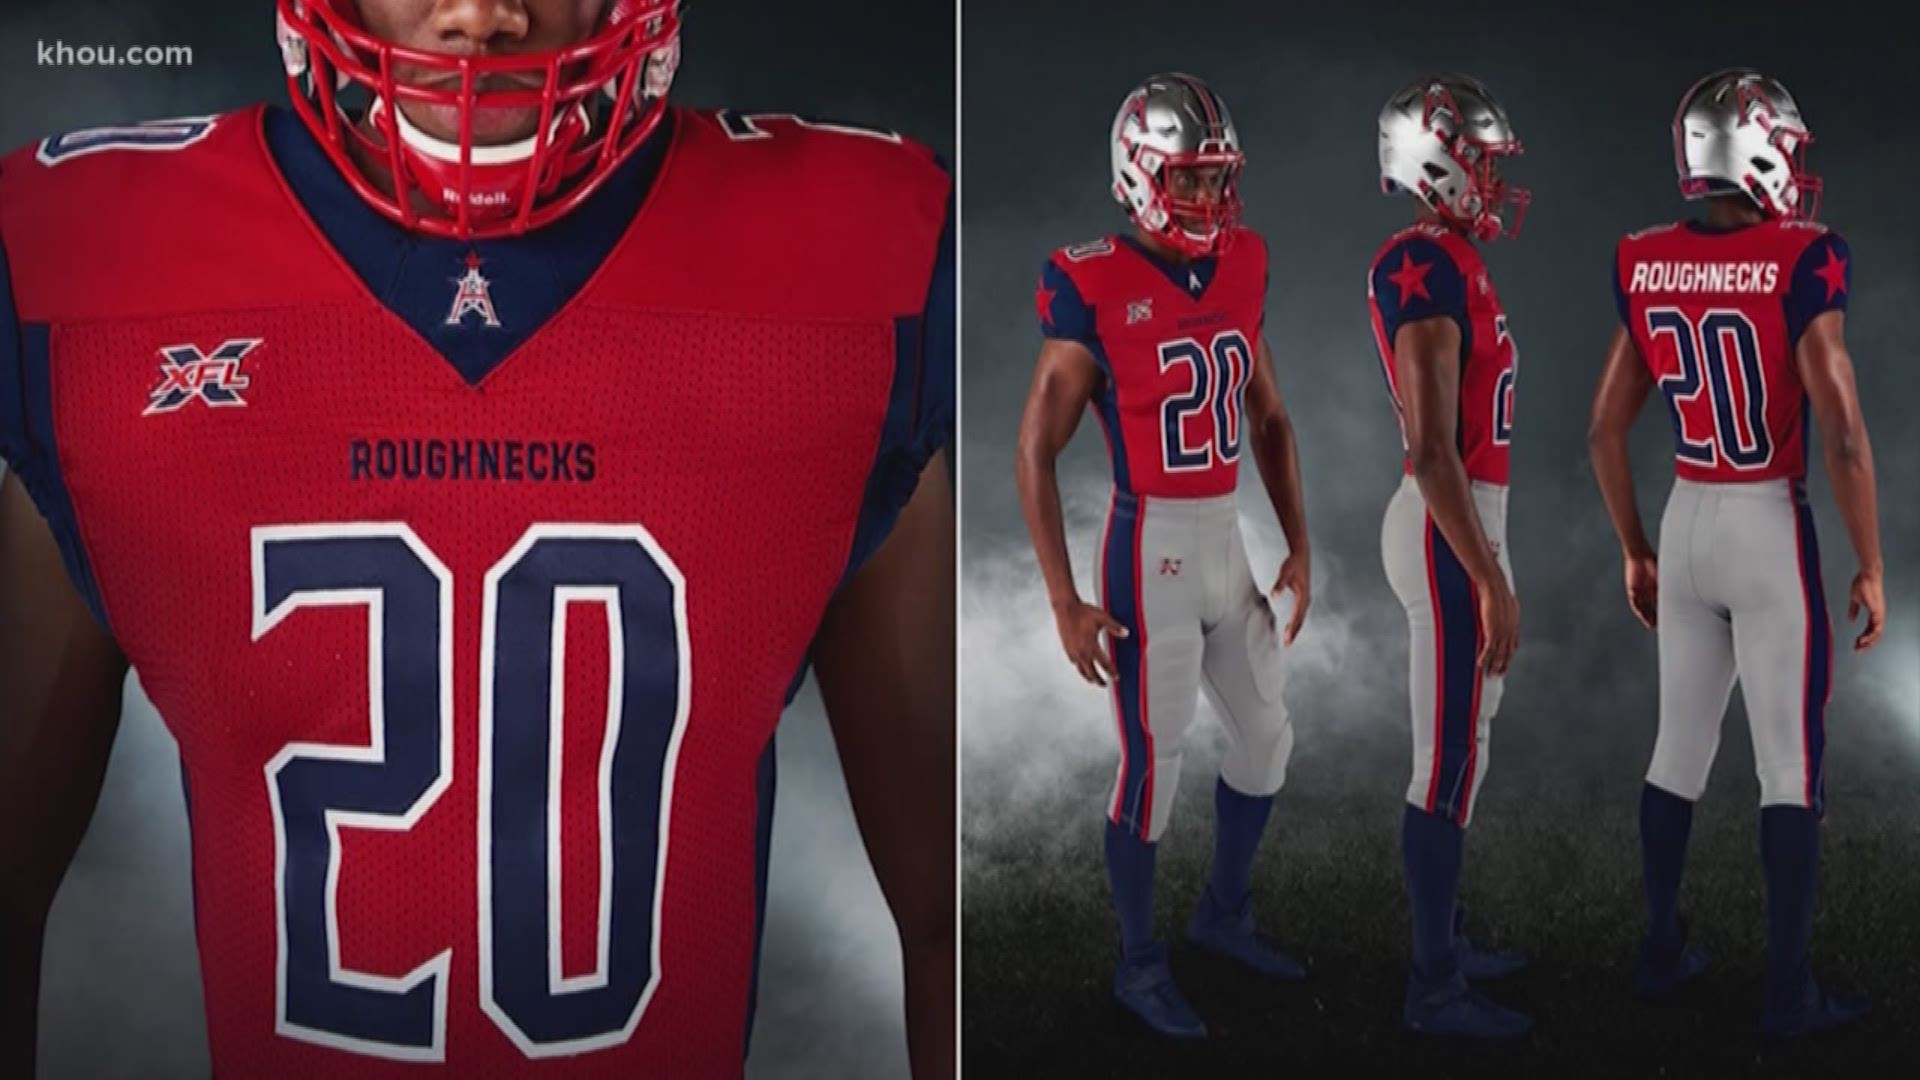 The Houston Roughnecks unveiled their team uniforms and helmet for the first time at a private dinner this week.